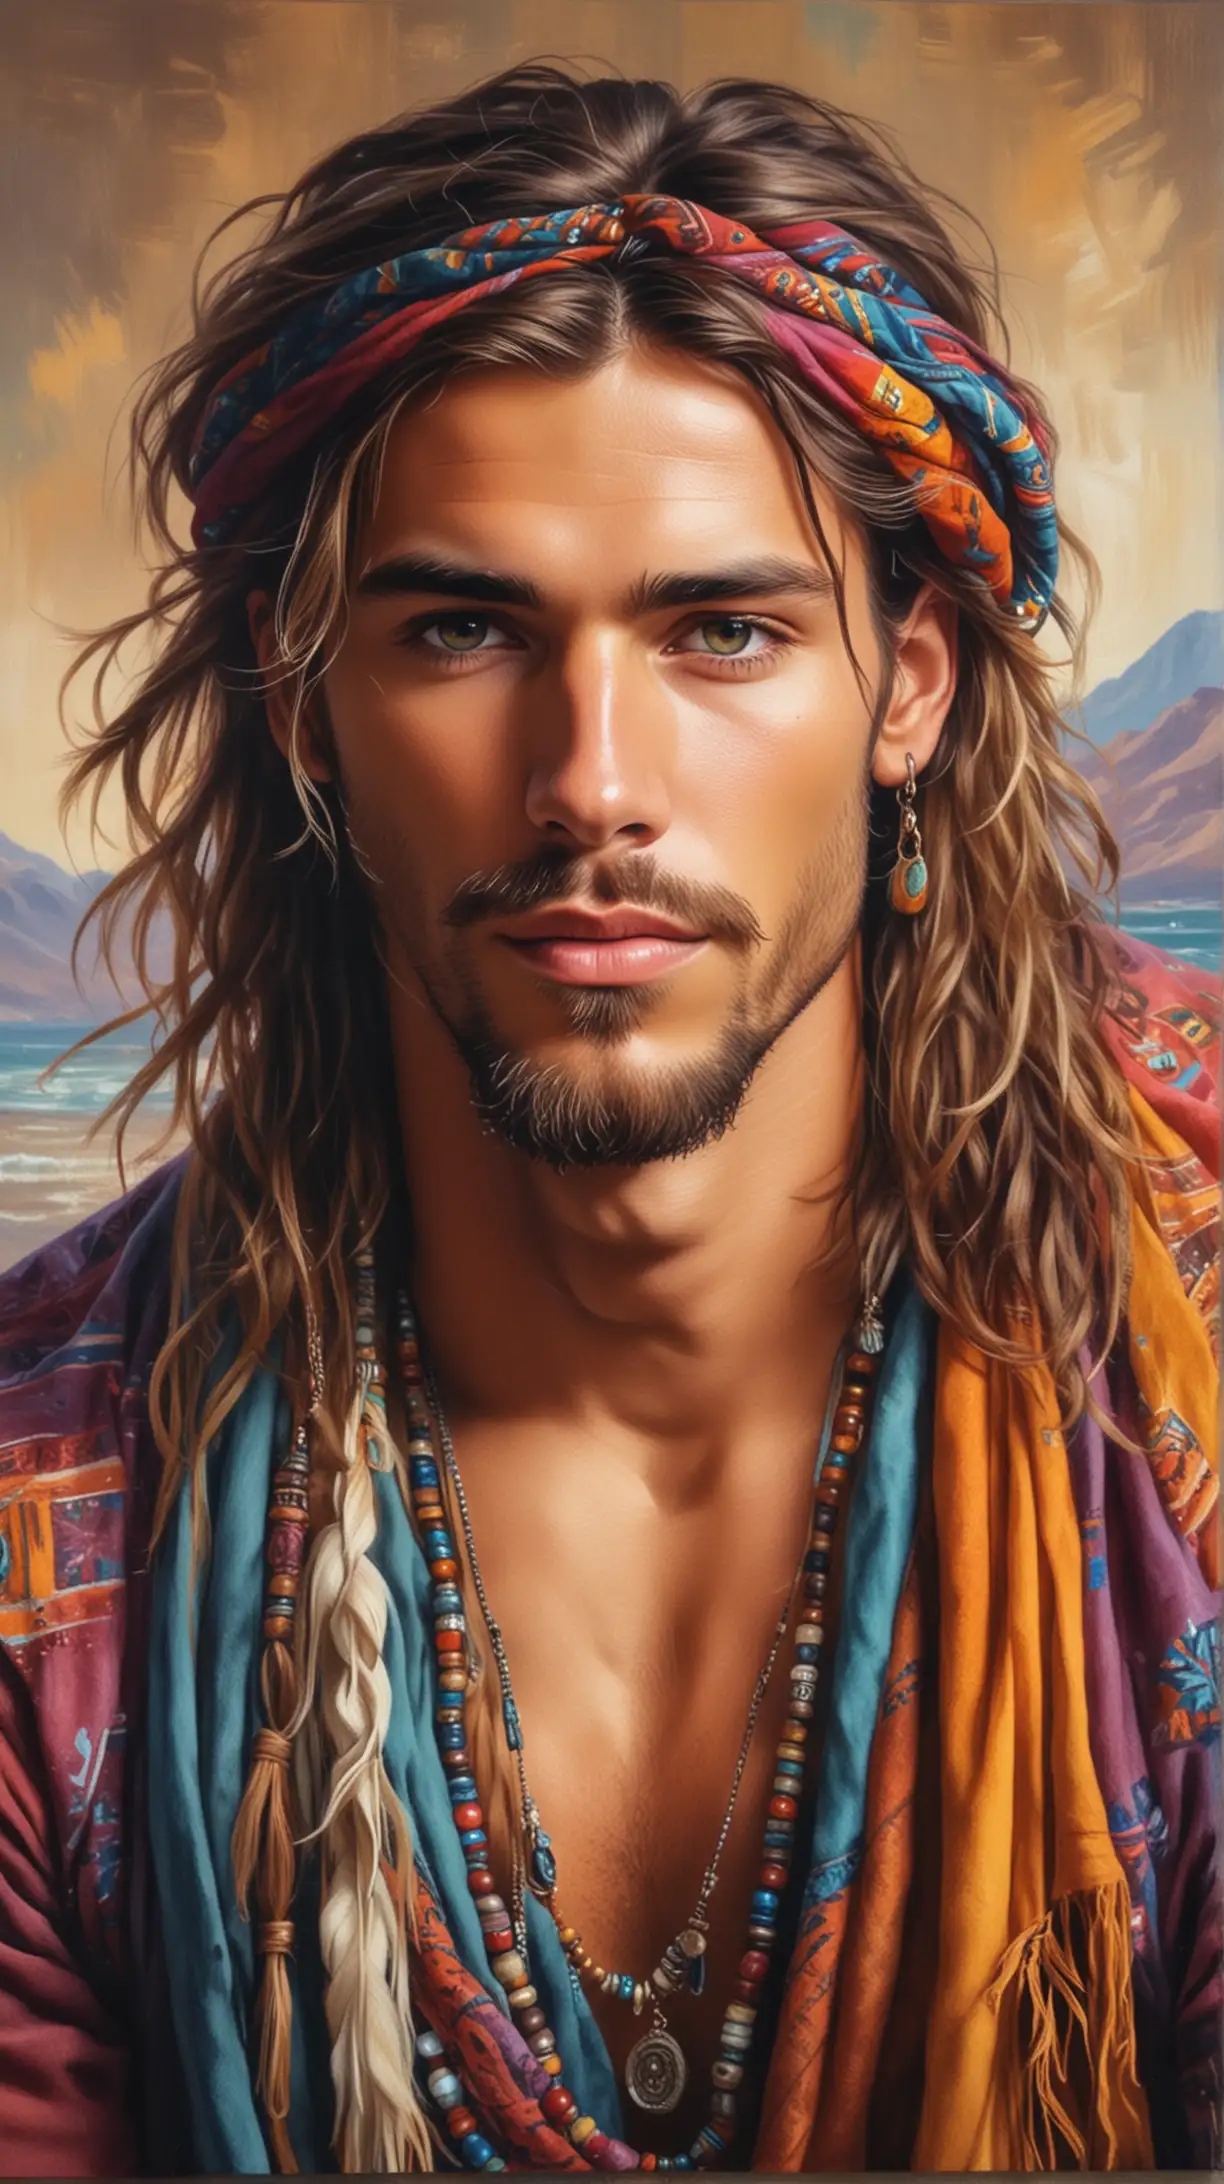 Radiant Boho Man in Vivid Oil Painting on Canvas 4K Photo